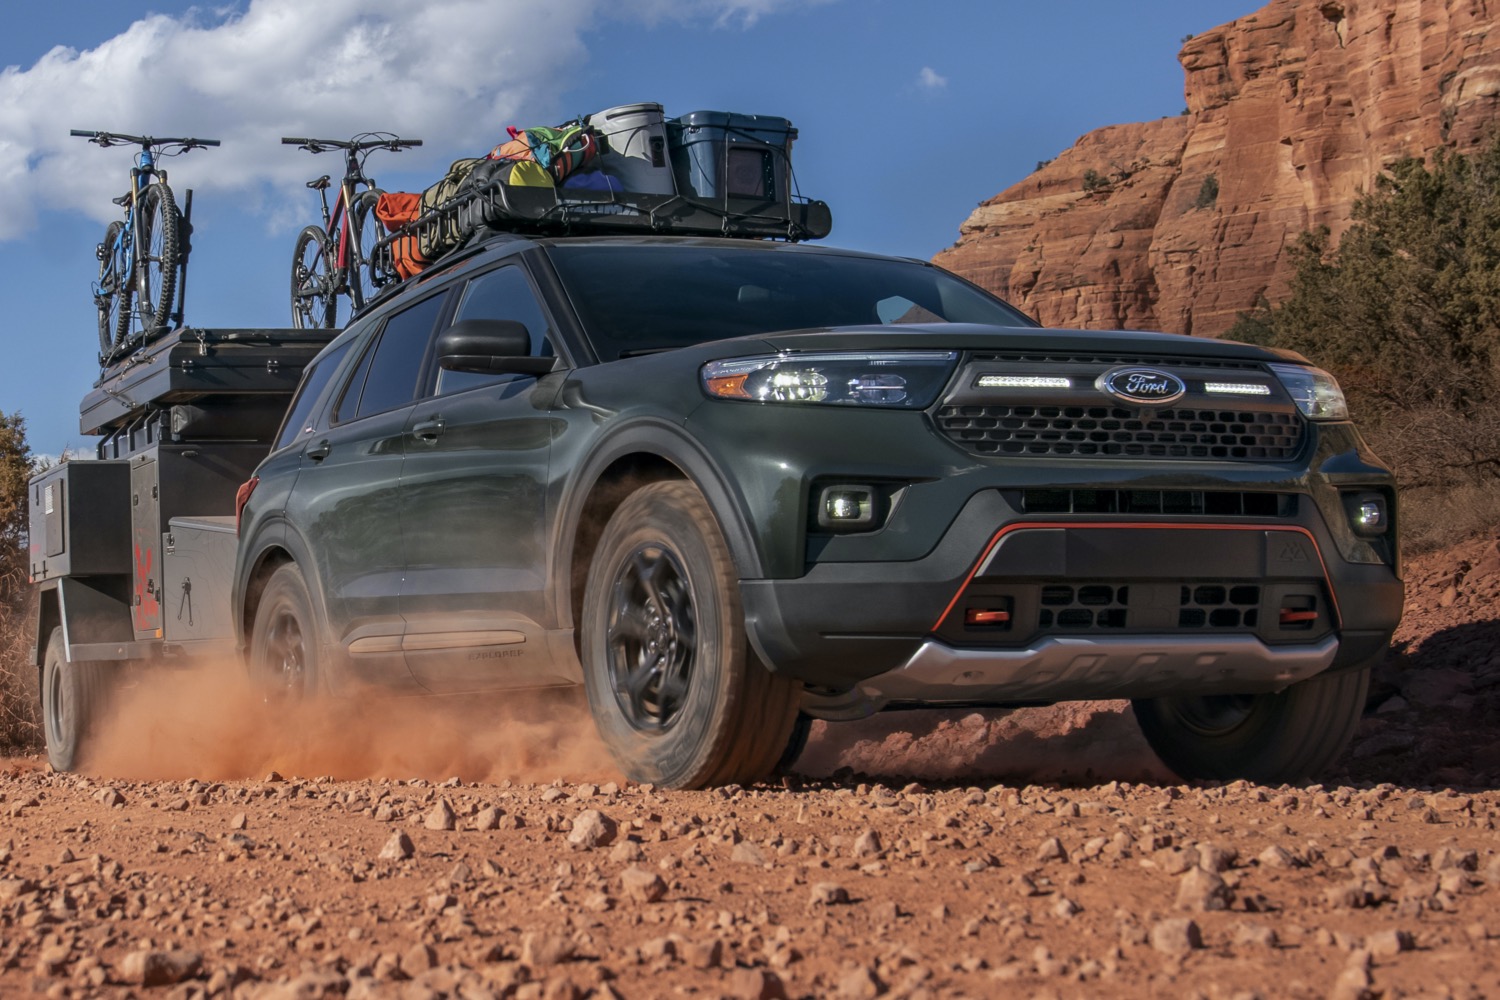 2021 Ford Explorer Timberline Off-Road Light Kit Out Now, Costs $499